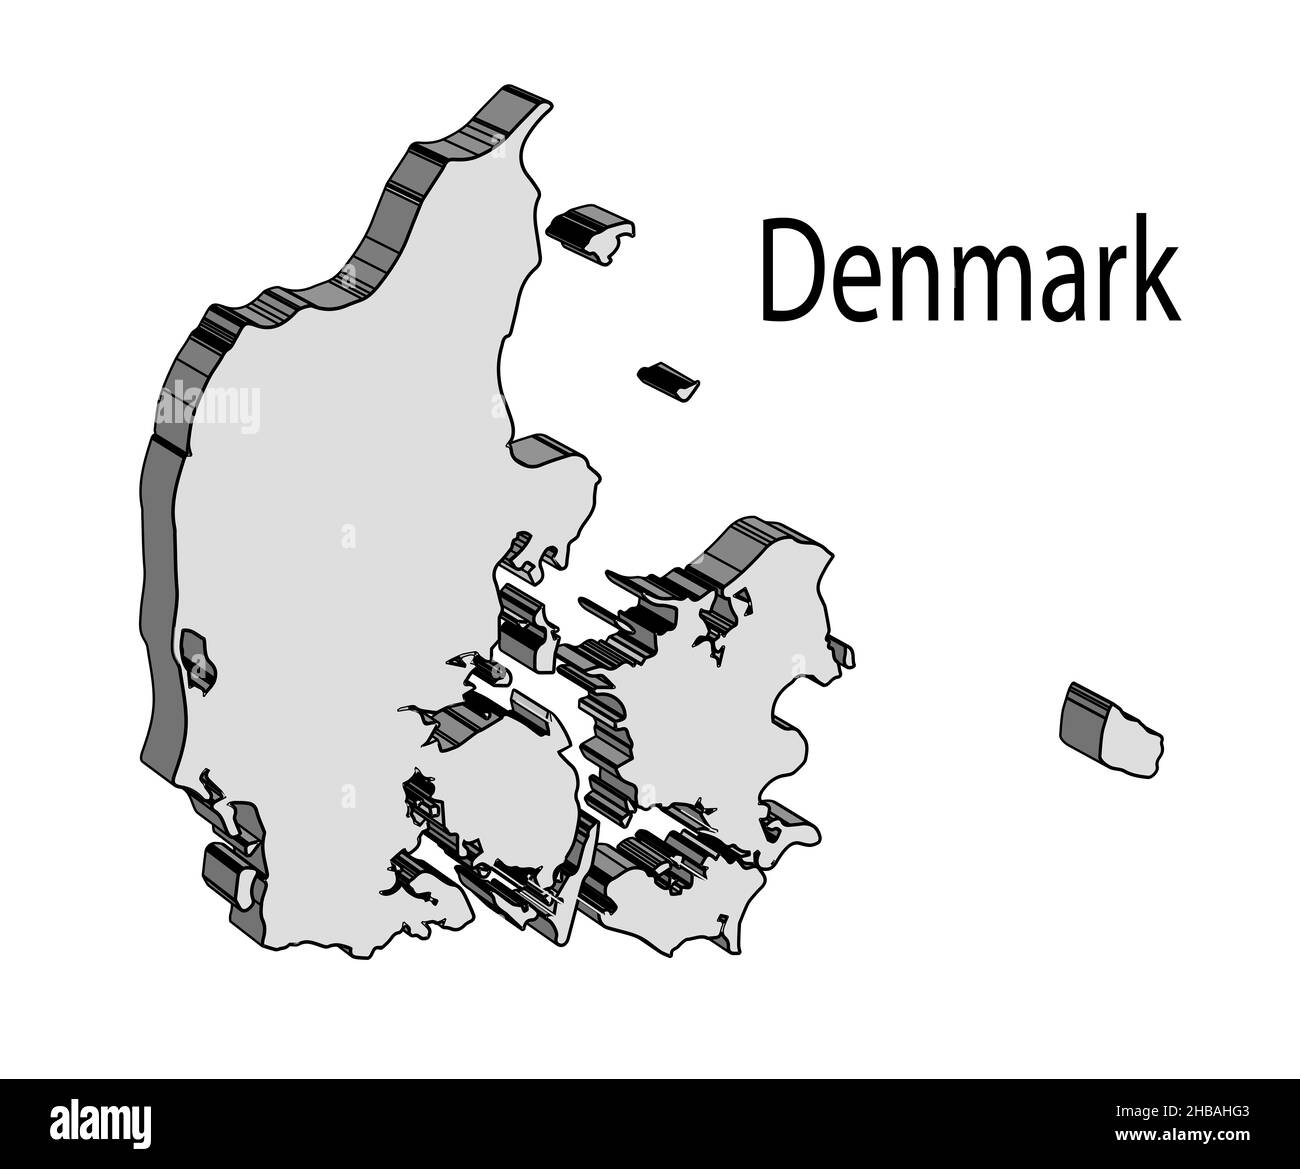 Outline 3D map of Denmark over a white background Stock Photo